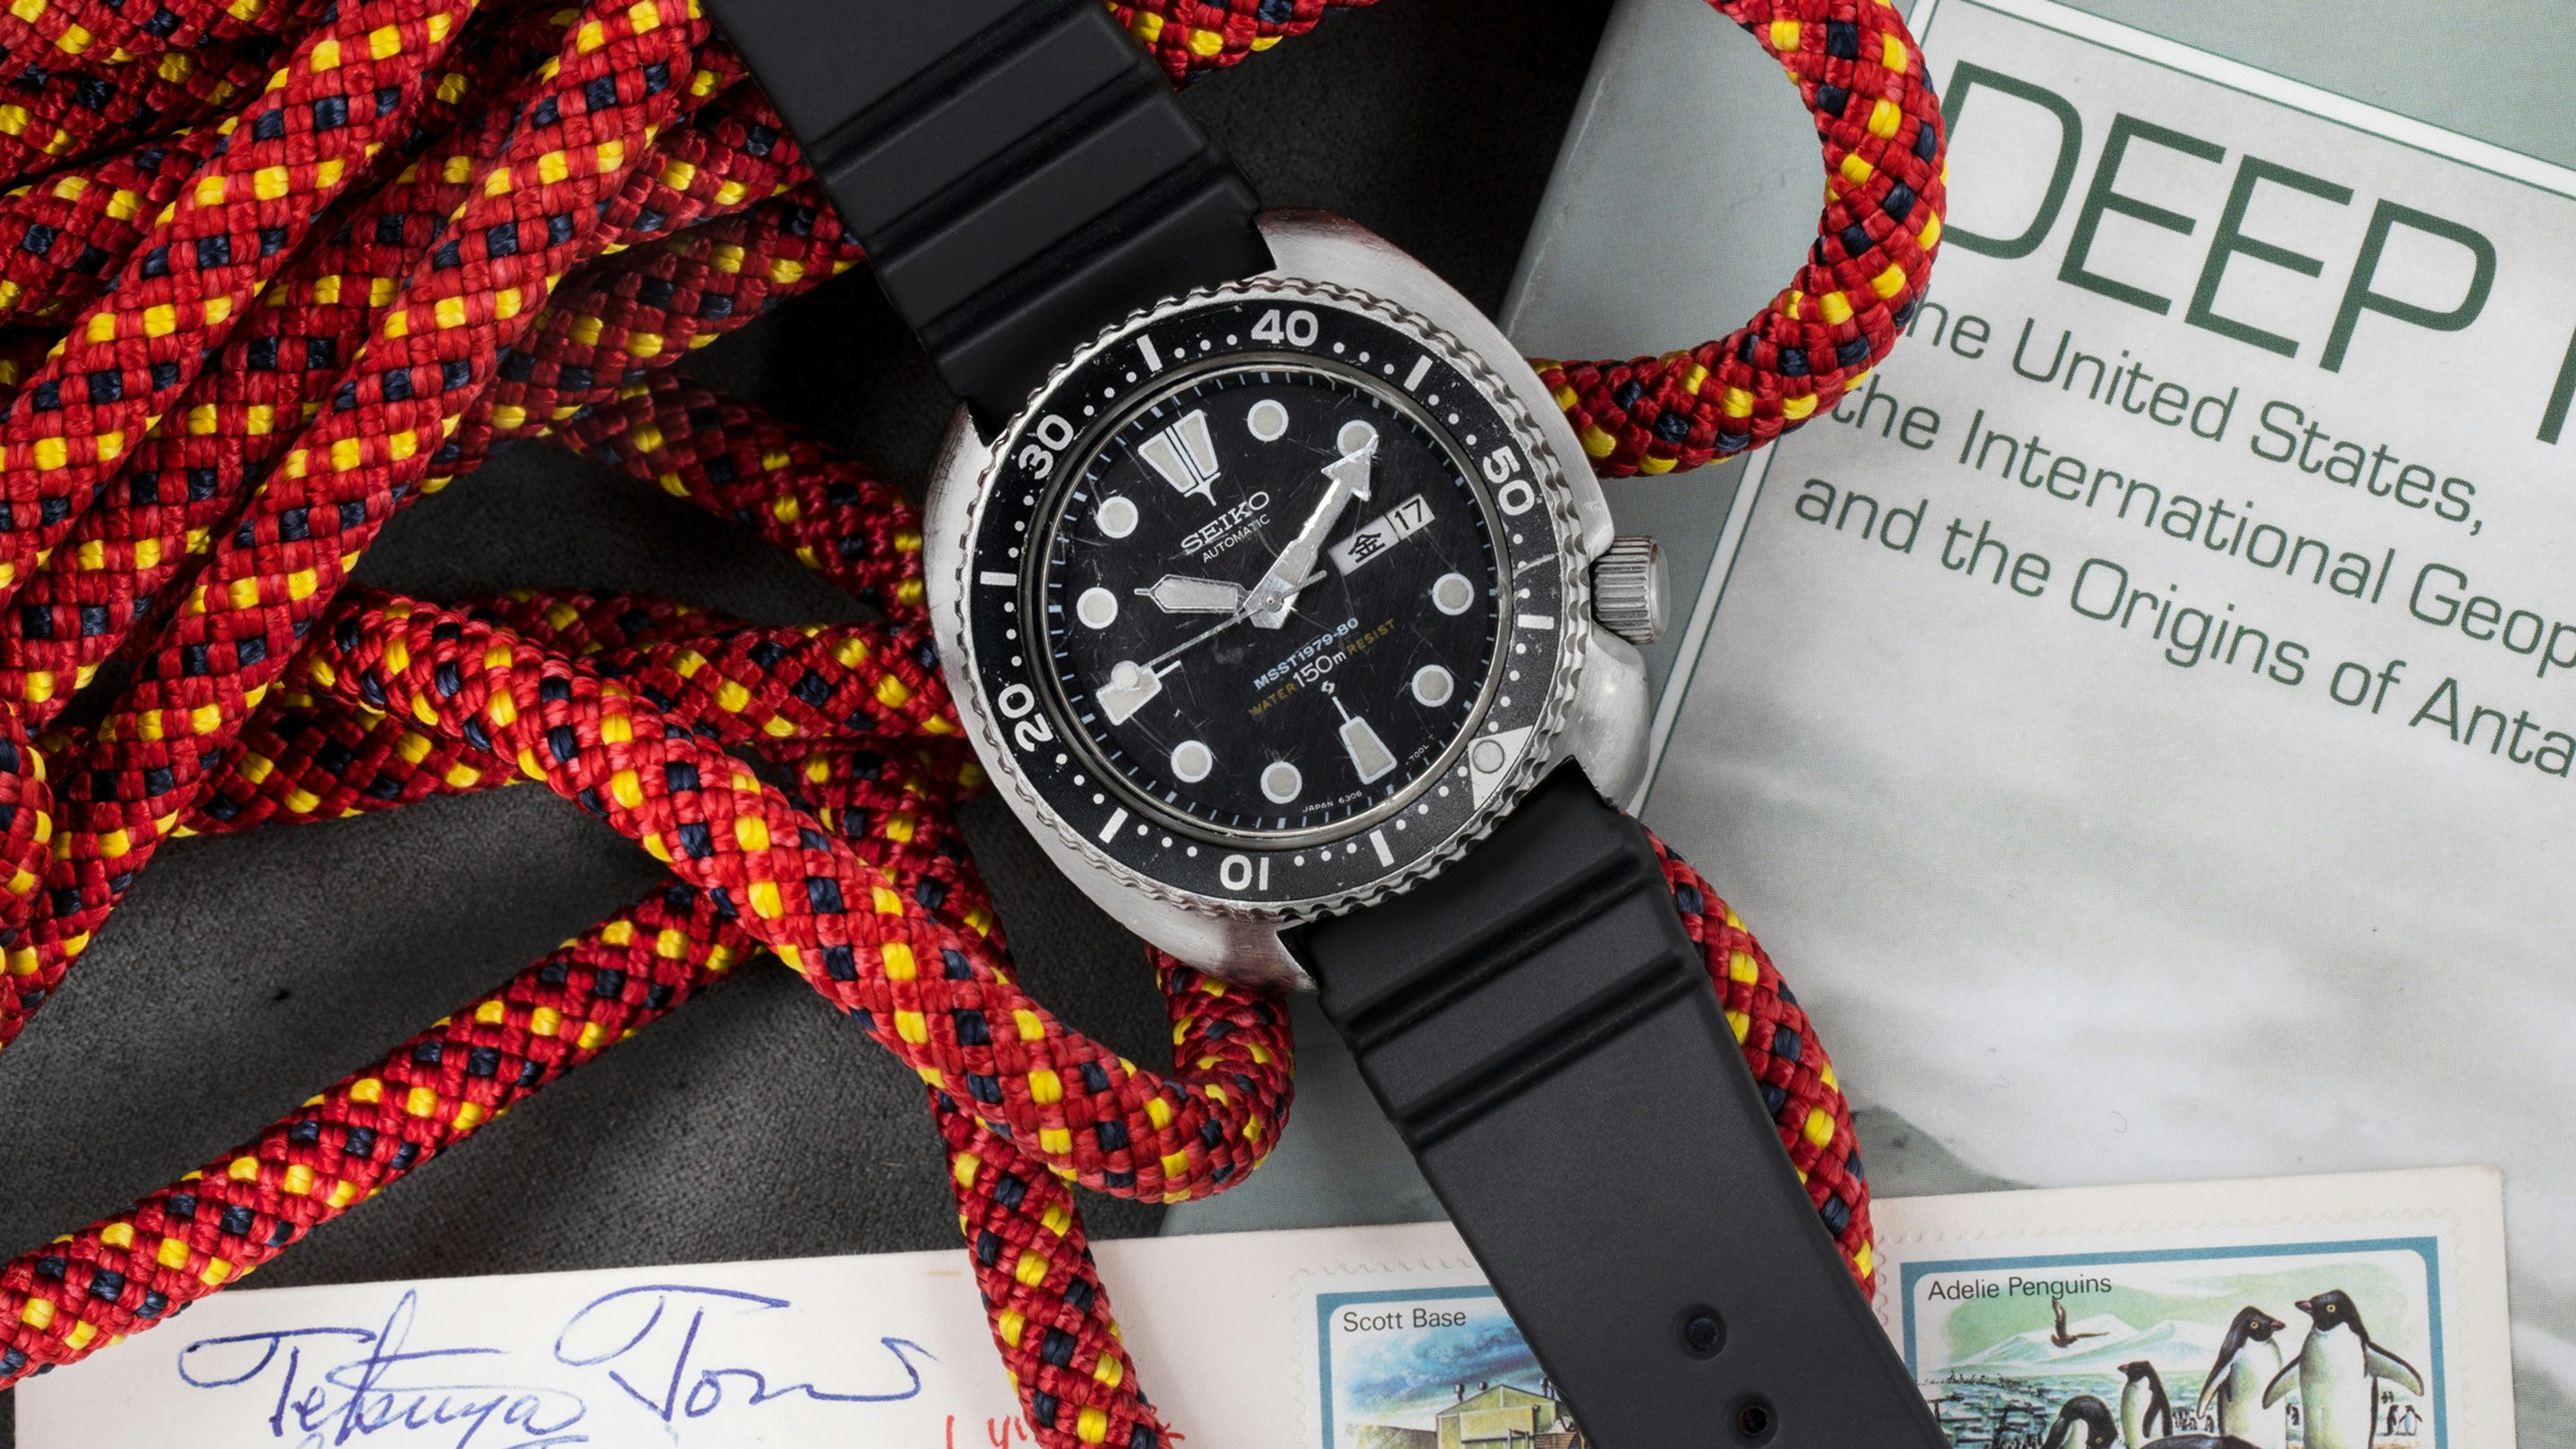 The Return of the Turtle: Seiko Brings Back a Classic - Worn & Wound